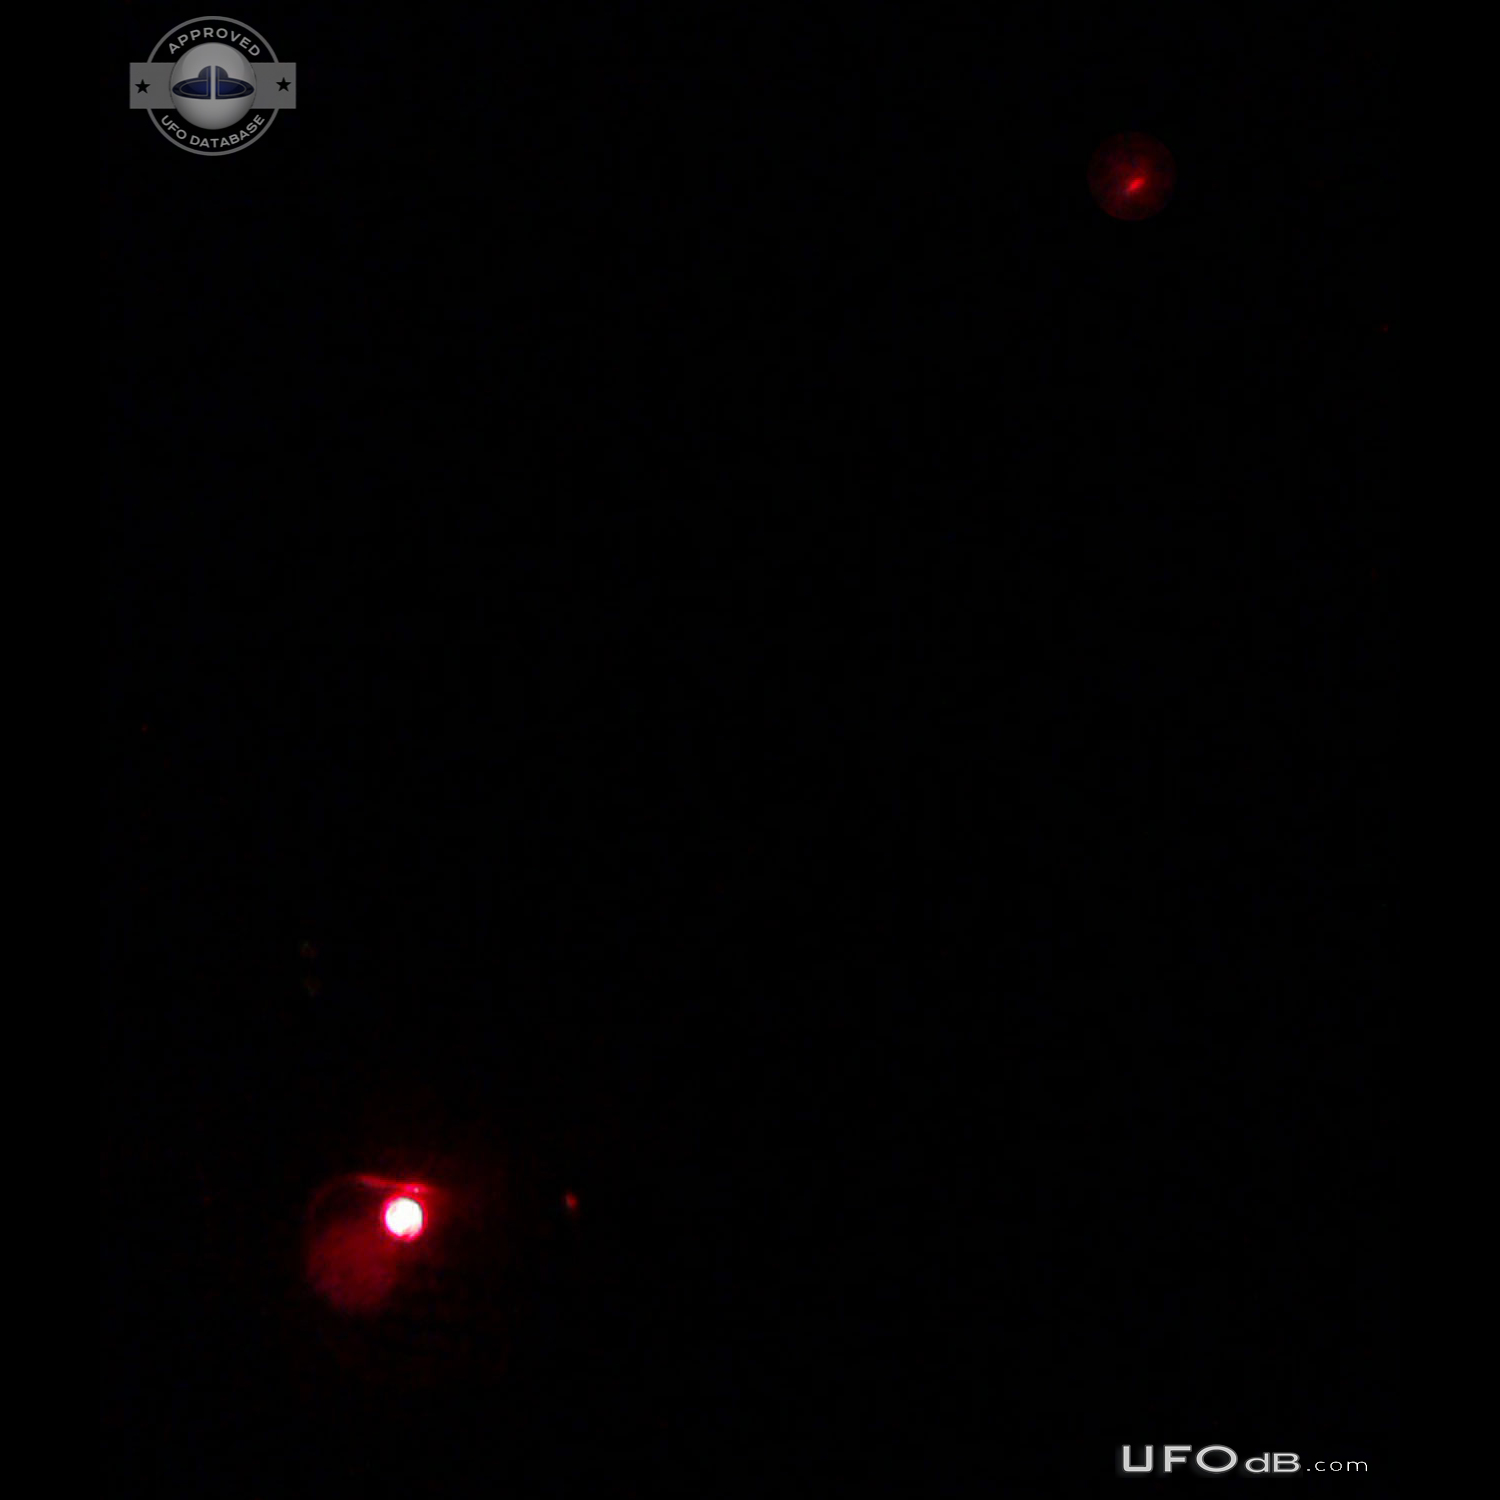 2 Red UFOs illuminating the Clouds - Toddington, Bedfordshire UK 2013 UFO Picture #653-1